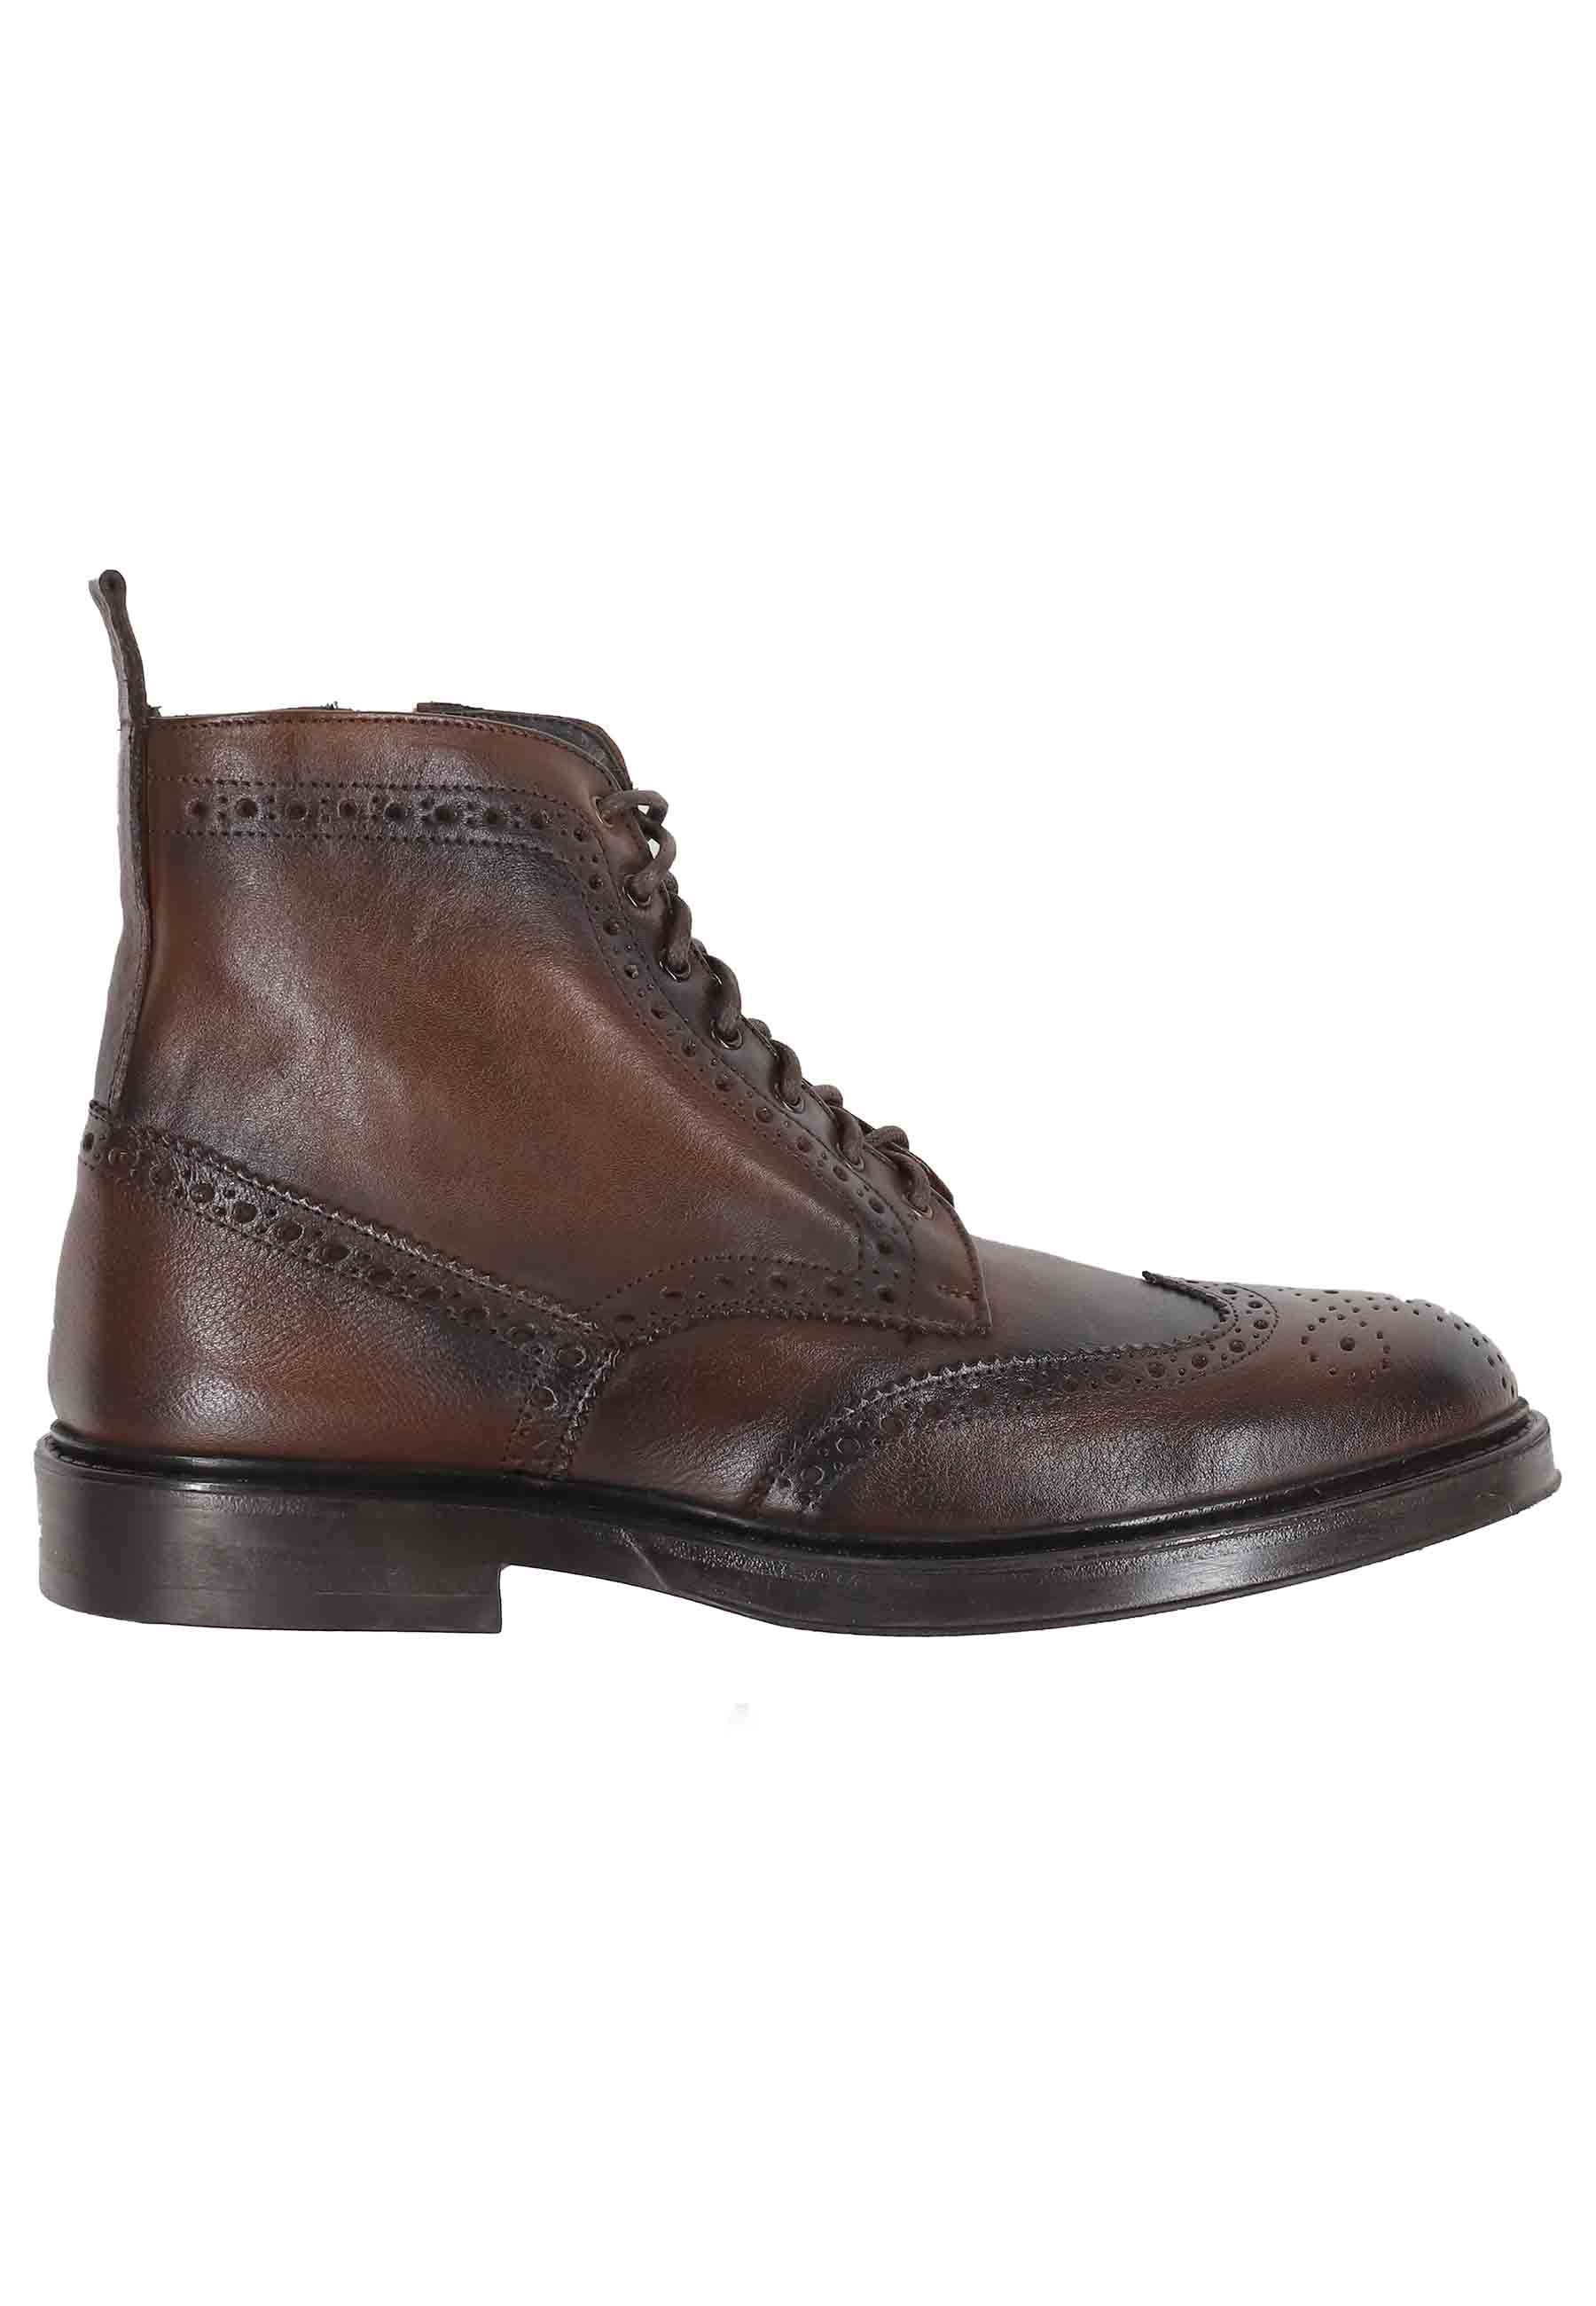 Men's lace-up ankle boots in tan leather with stitching and rubber sole